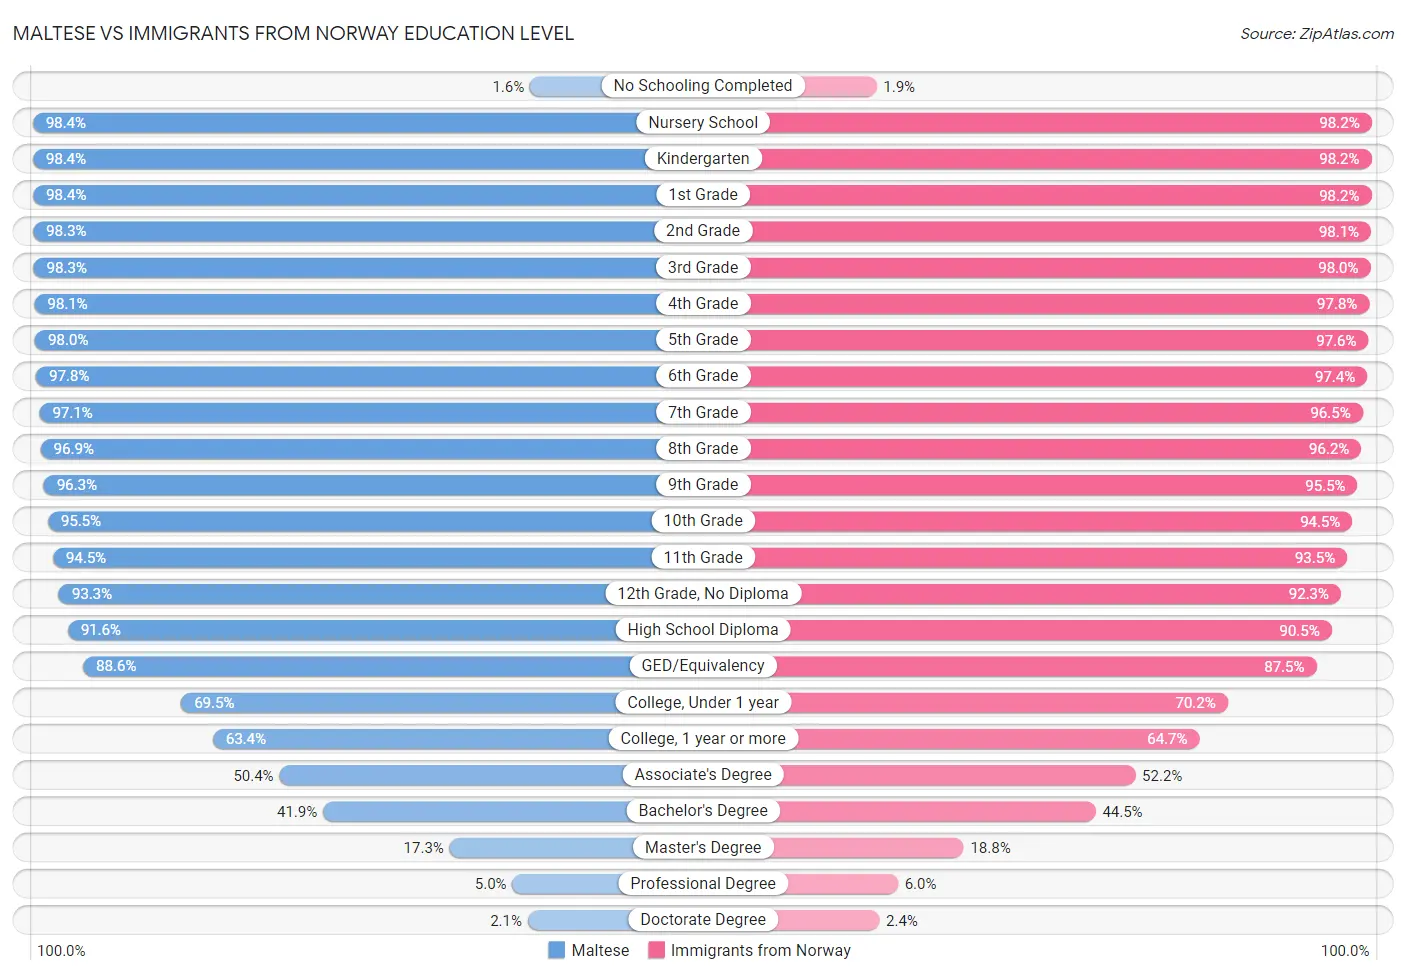 Maltese vs Immigrants from Norway Education Level